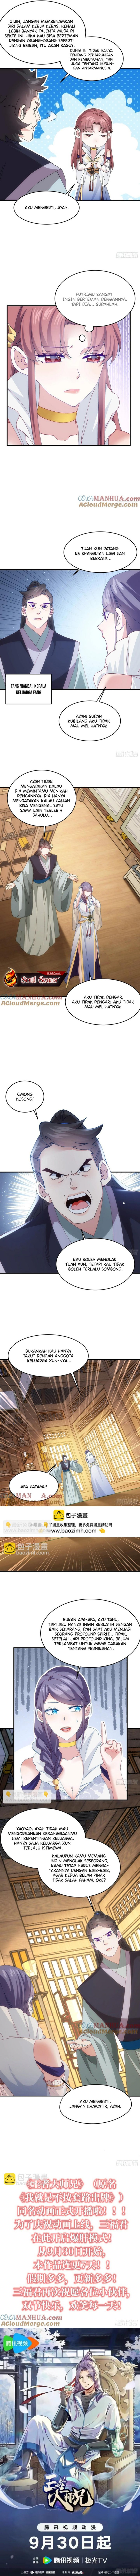 Dilarang COPAS - situs resmi www.mangacanblog.com - Komik i just dont play the card according to the routine 203 - chapter 203 204 Indonesia i just dont play the card according to the routine 203 - chapter 203 Terbaru 3|Baca Manga Komik Indonesia|Mangacan